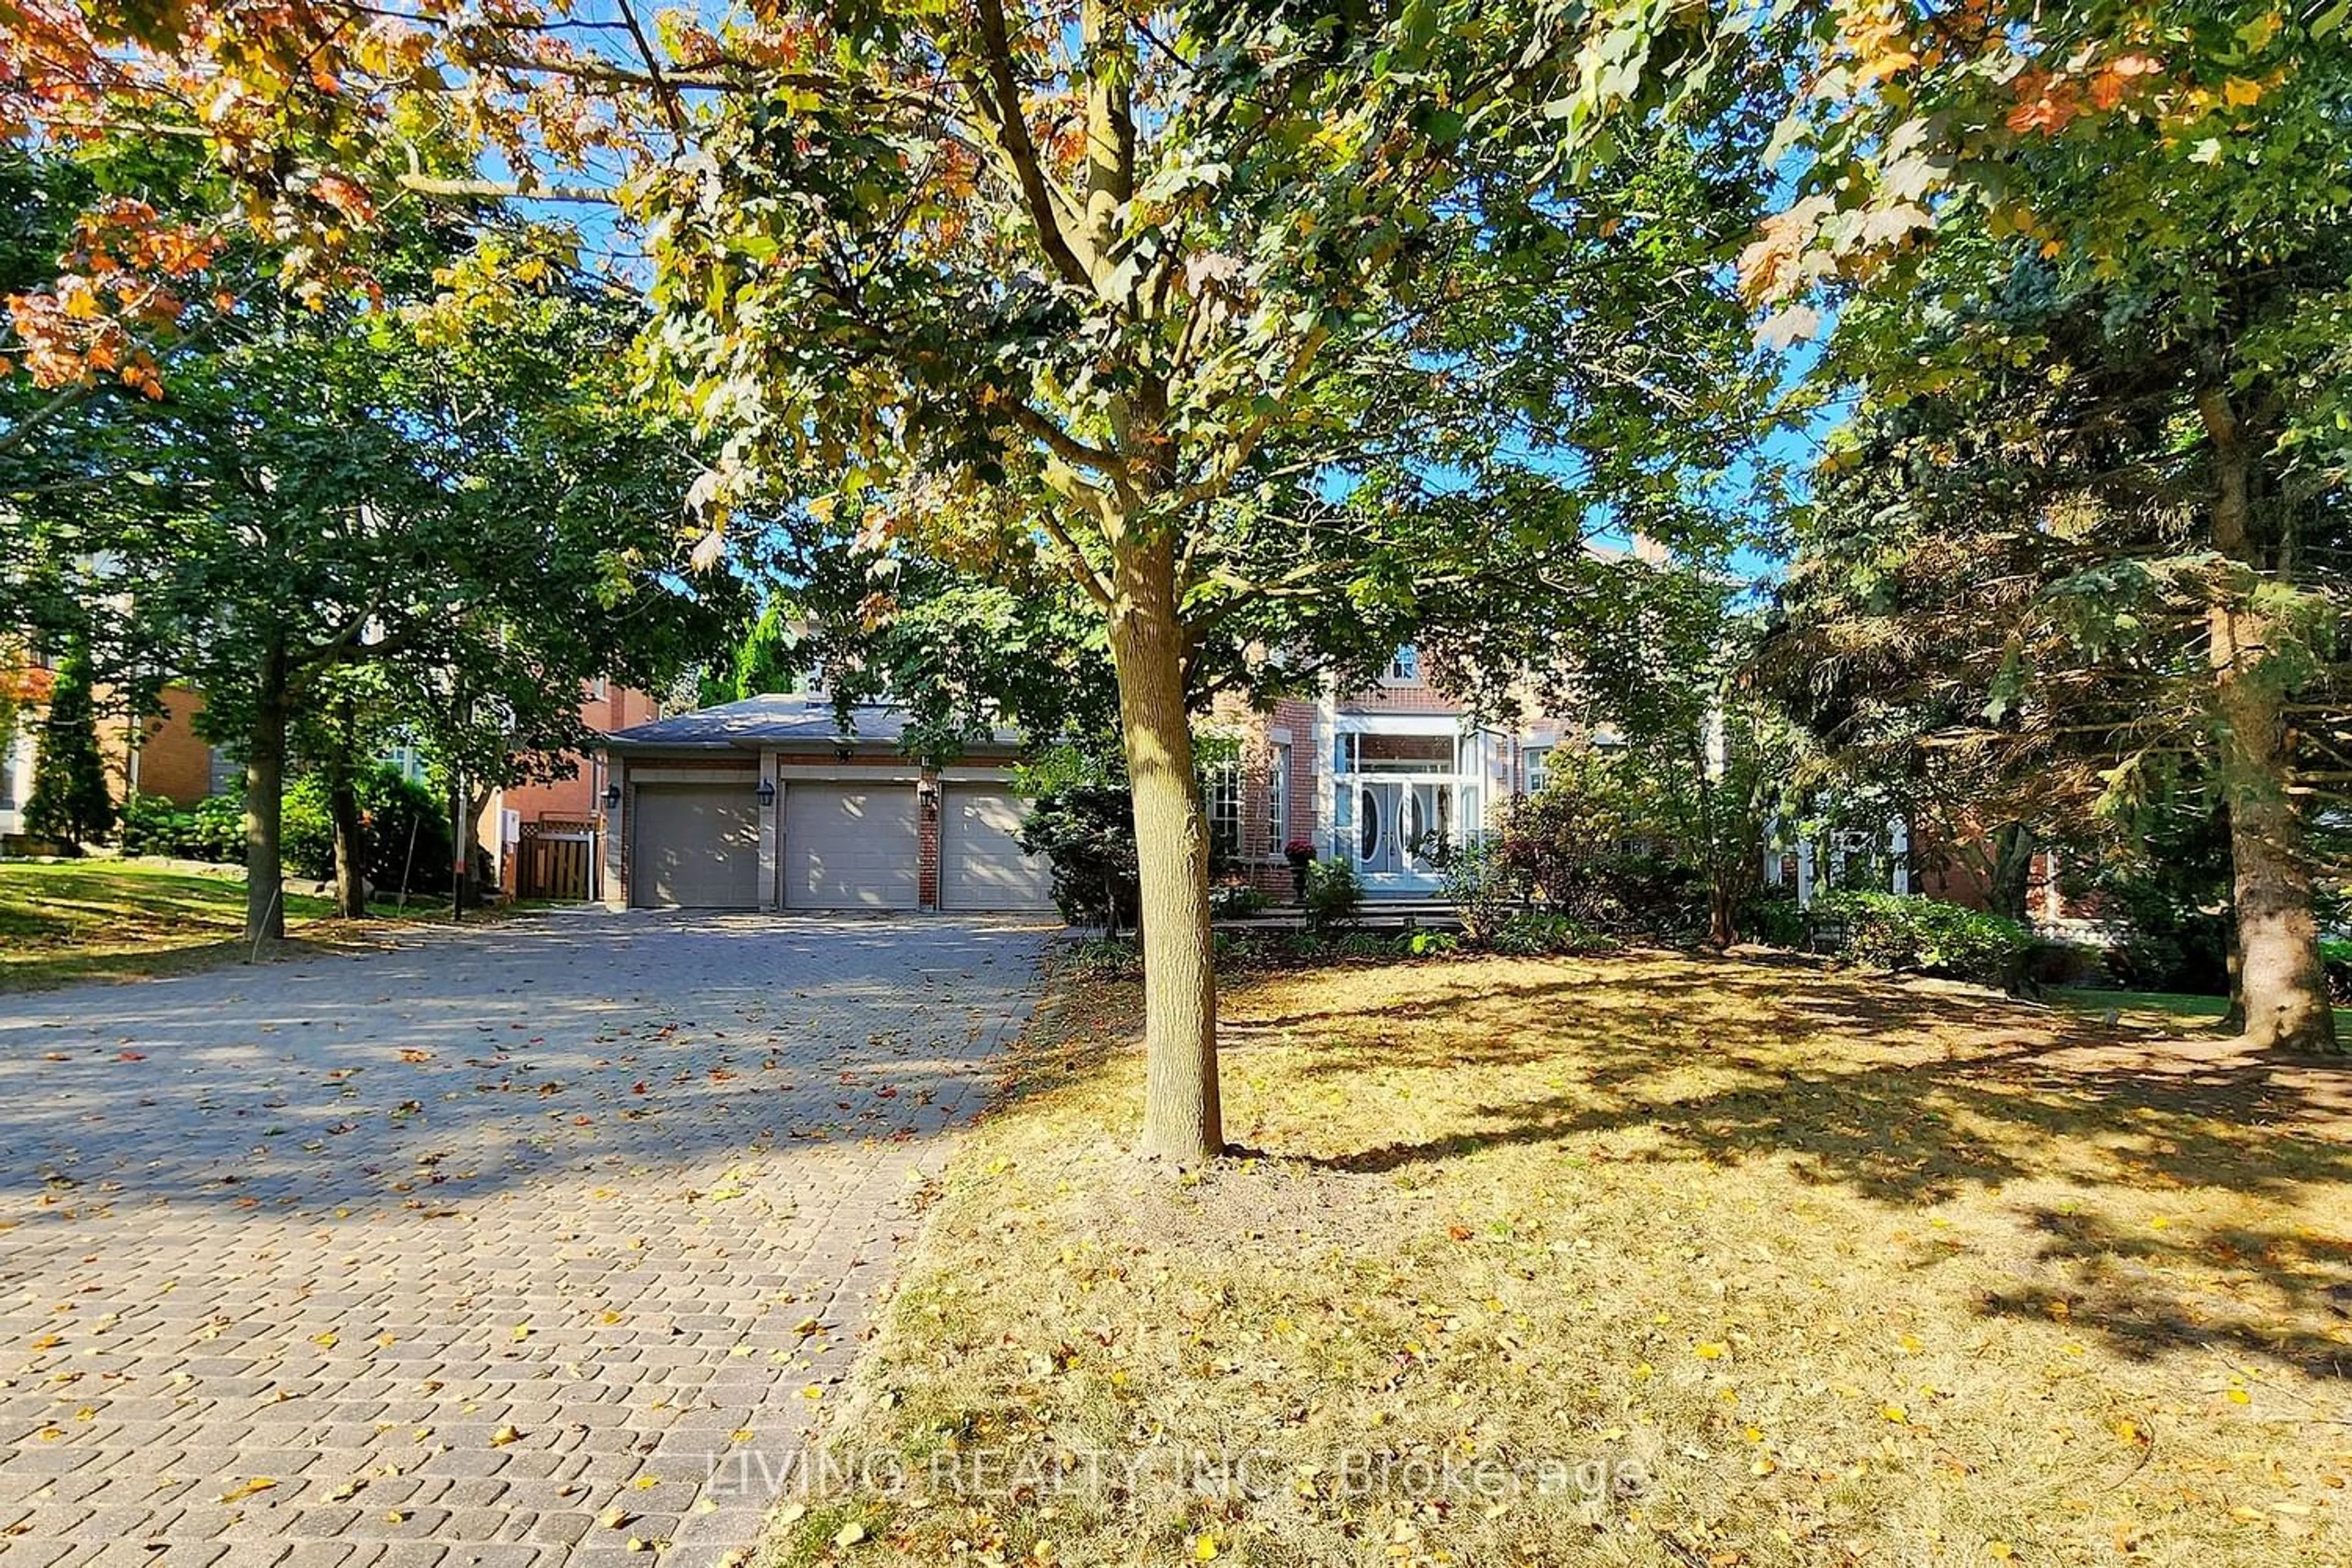 Street view for 10 Old Park Lane, Richmond Hill Ontario L4B 2L8